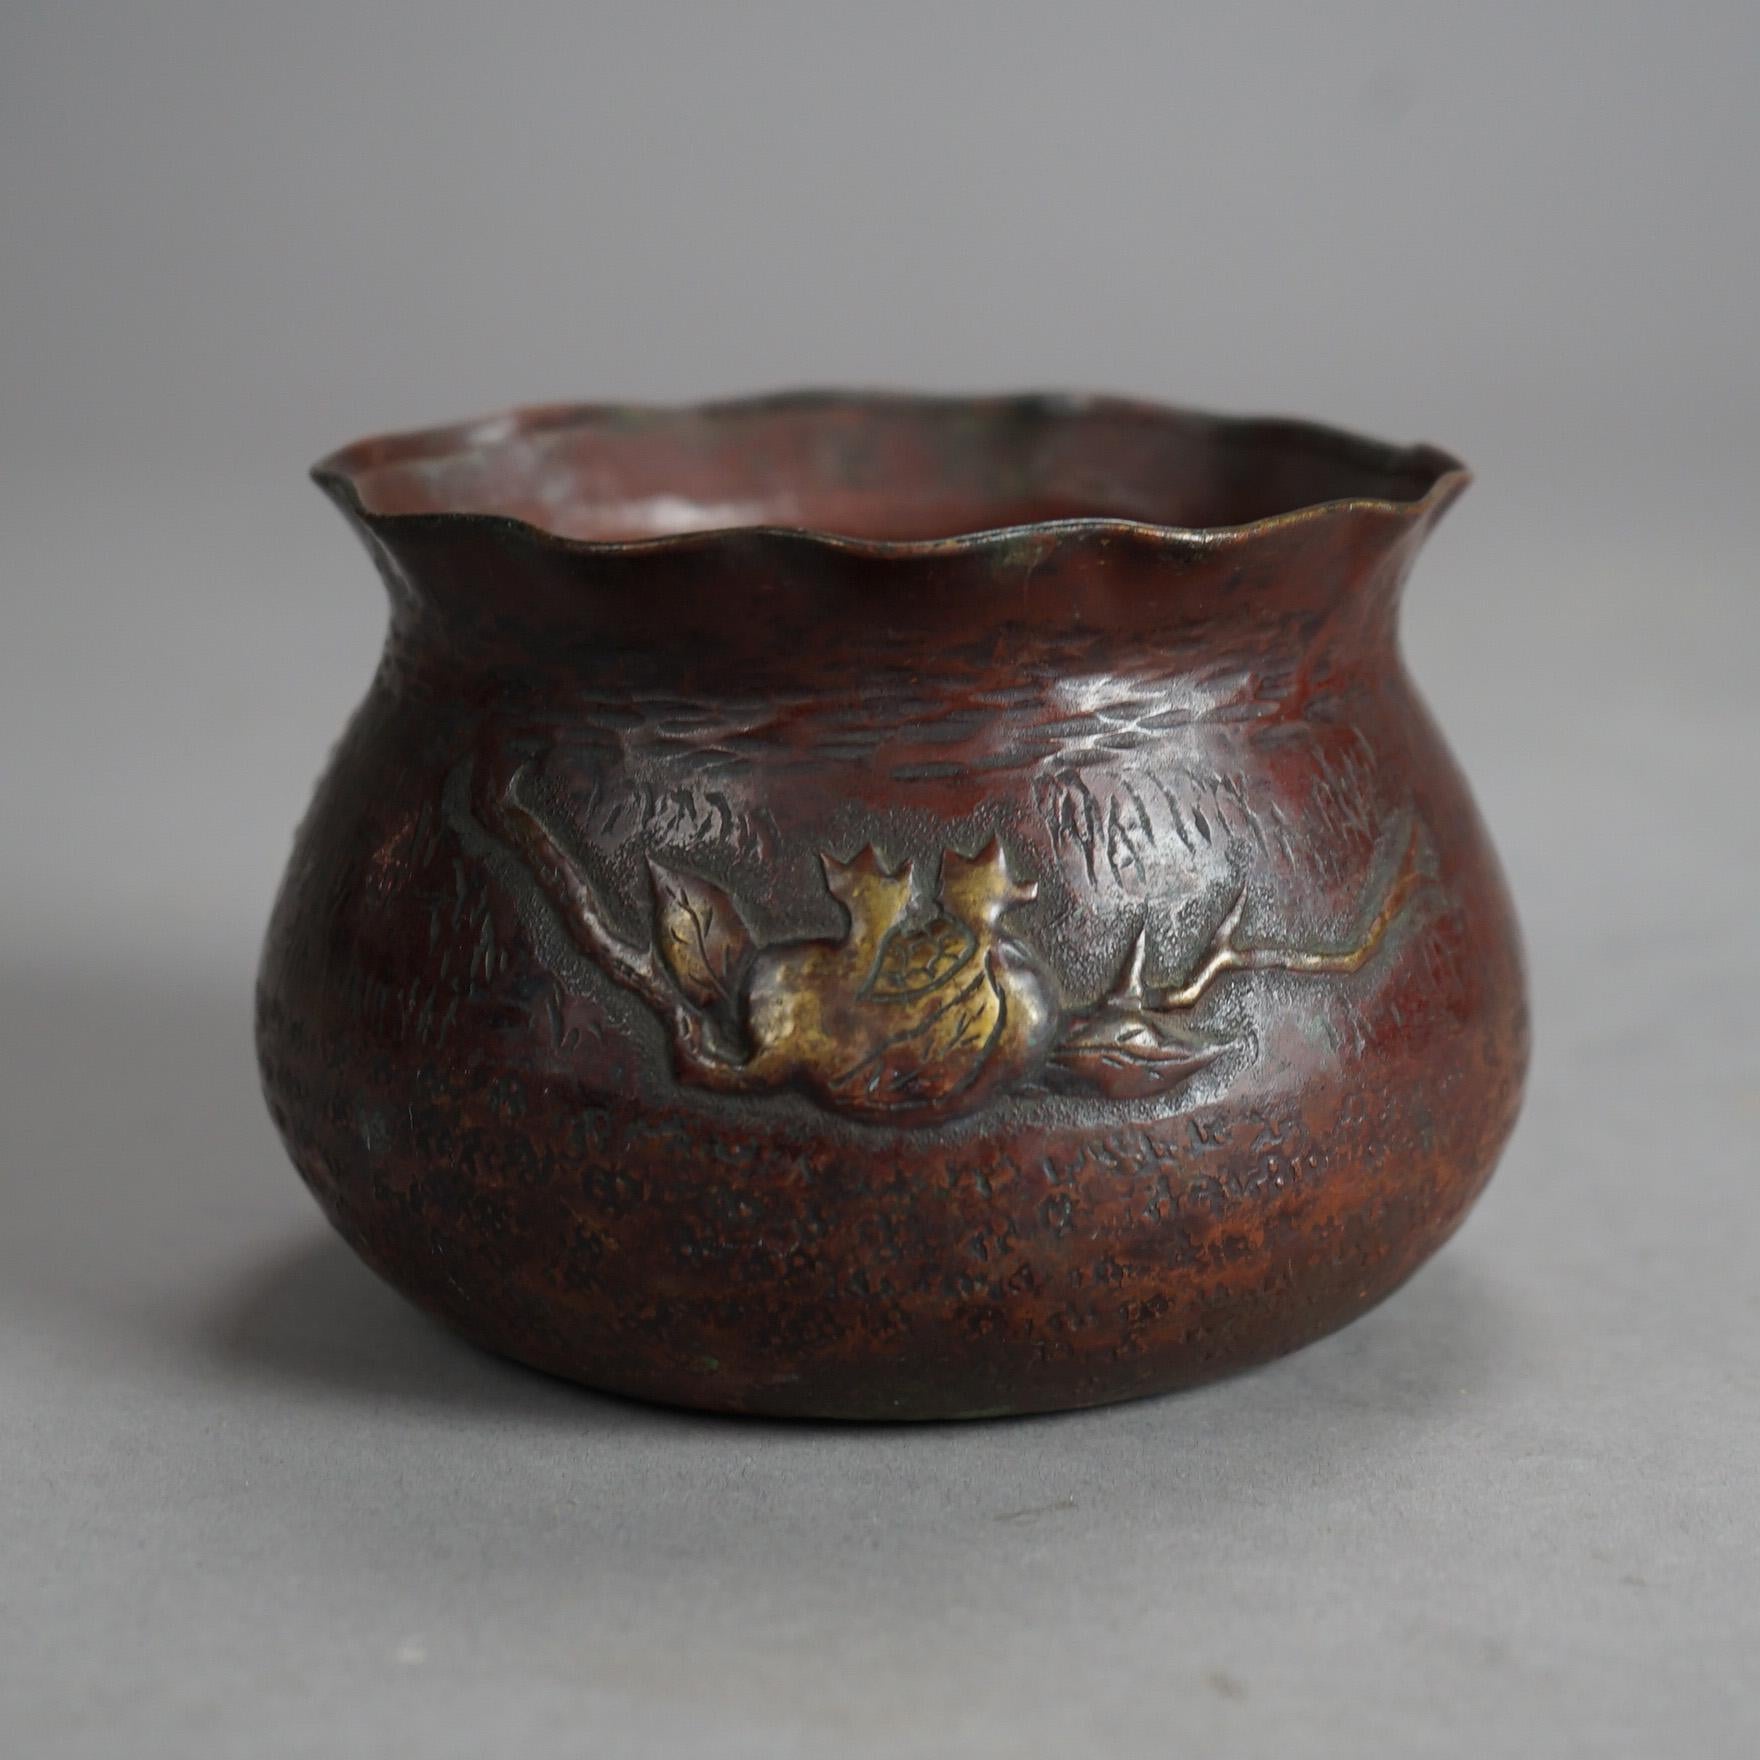 An antique Japanese bowl offers hammered copper and mixed metal construction with additional mixed metals, ruffled rom and embossed fruit and branch element, c1900

Measures- 3.5''H x 4.75''W x 4.75''D